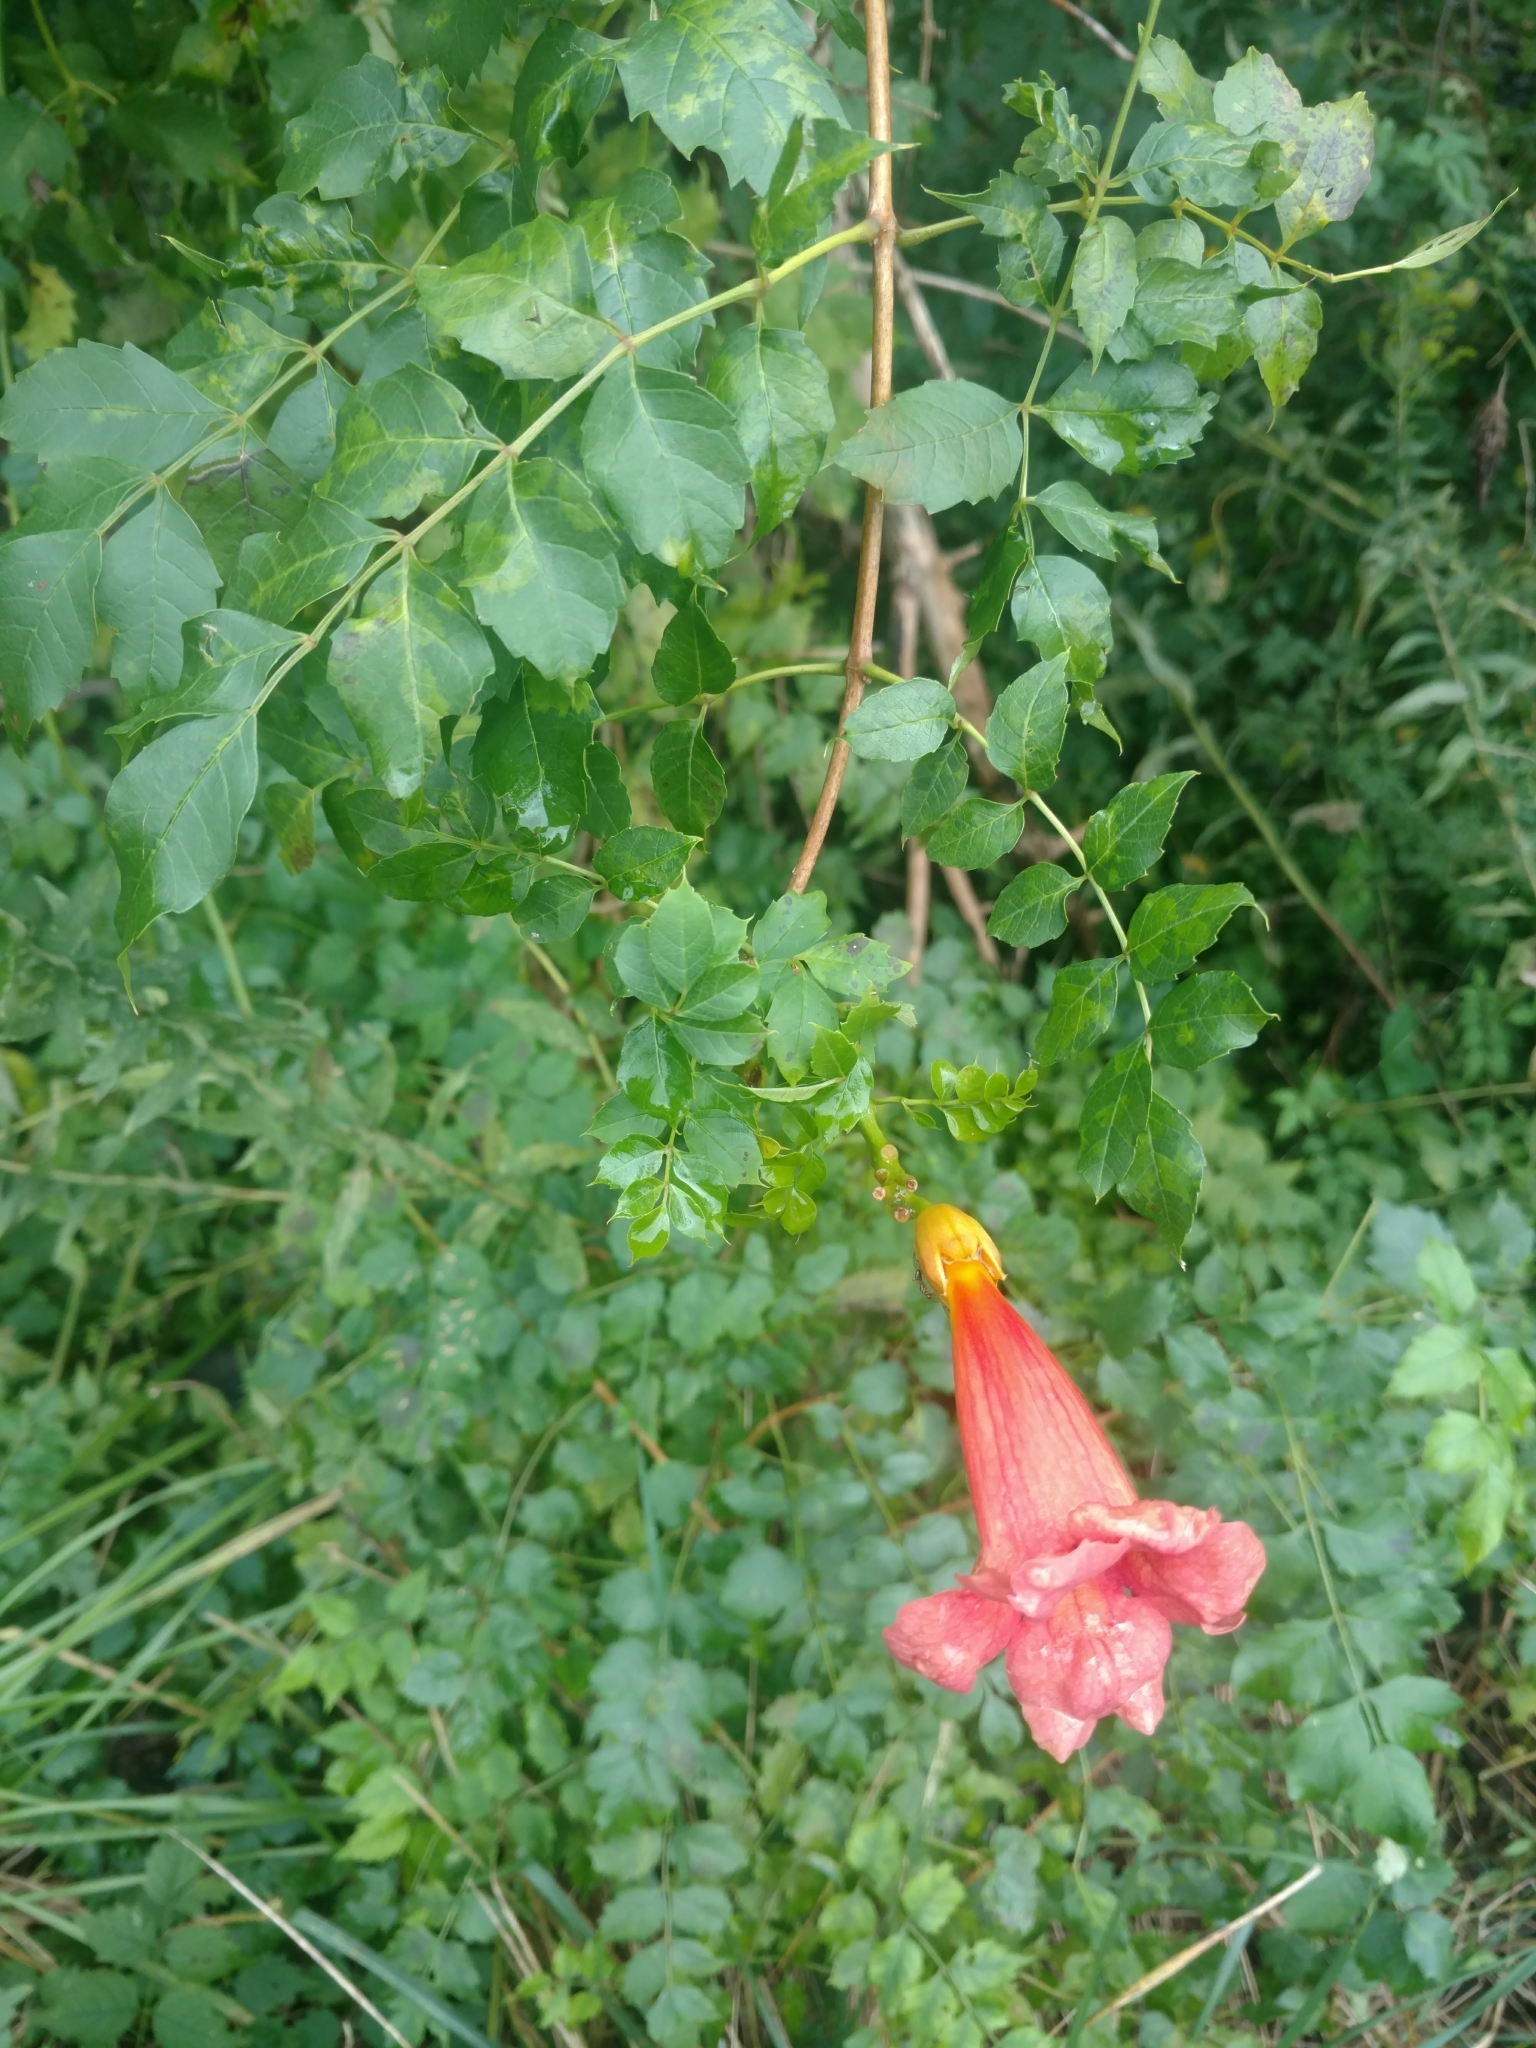 Trumpet creeper Definition & Meaning - Merriam-Webster